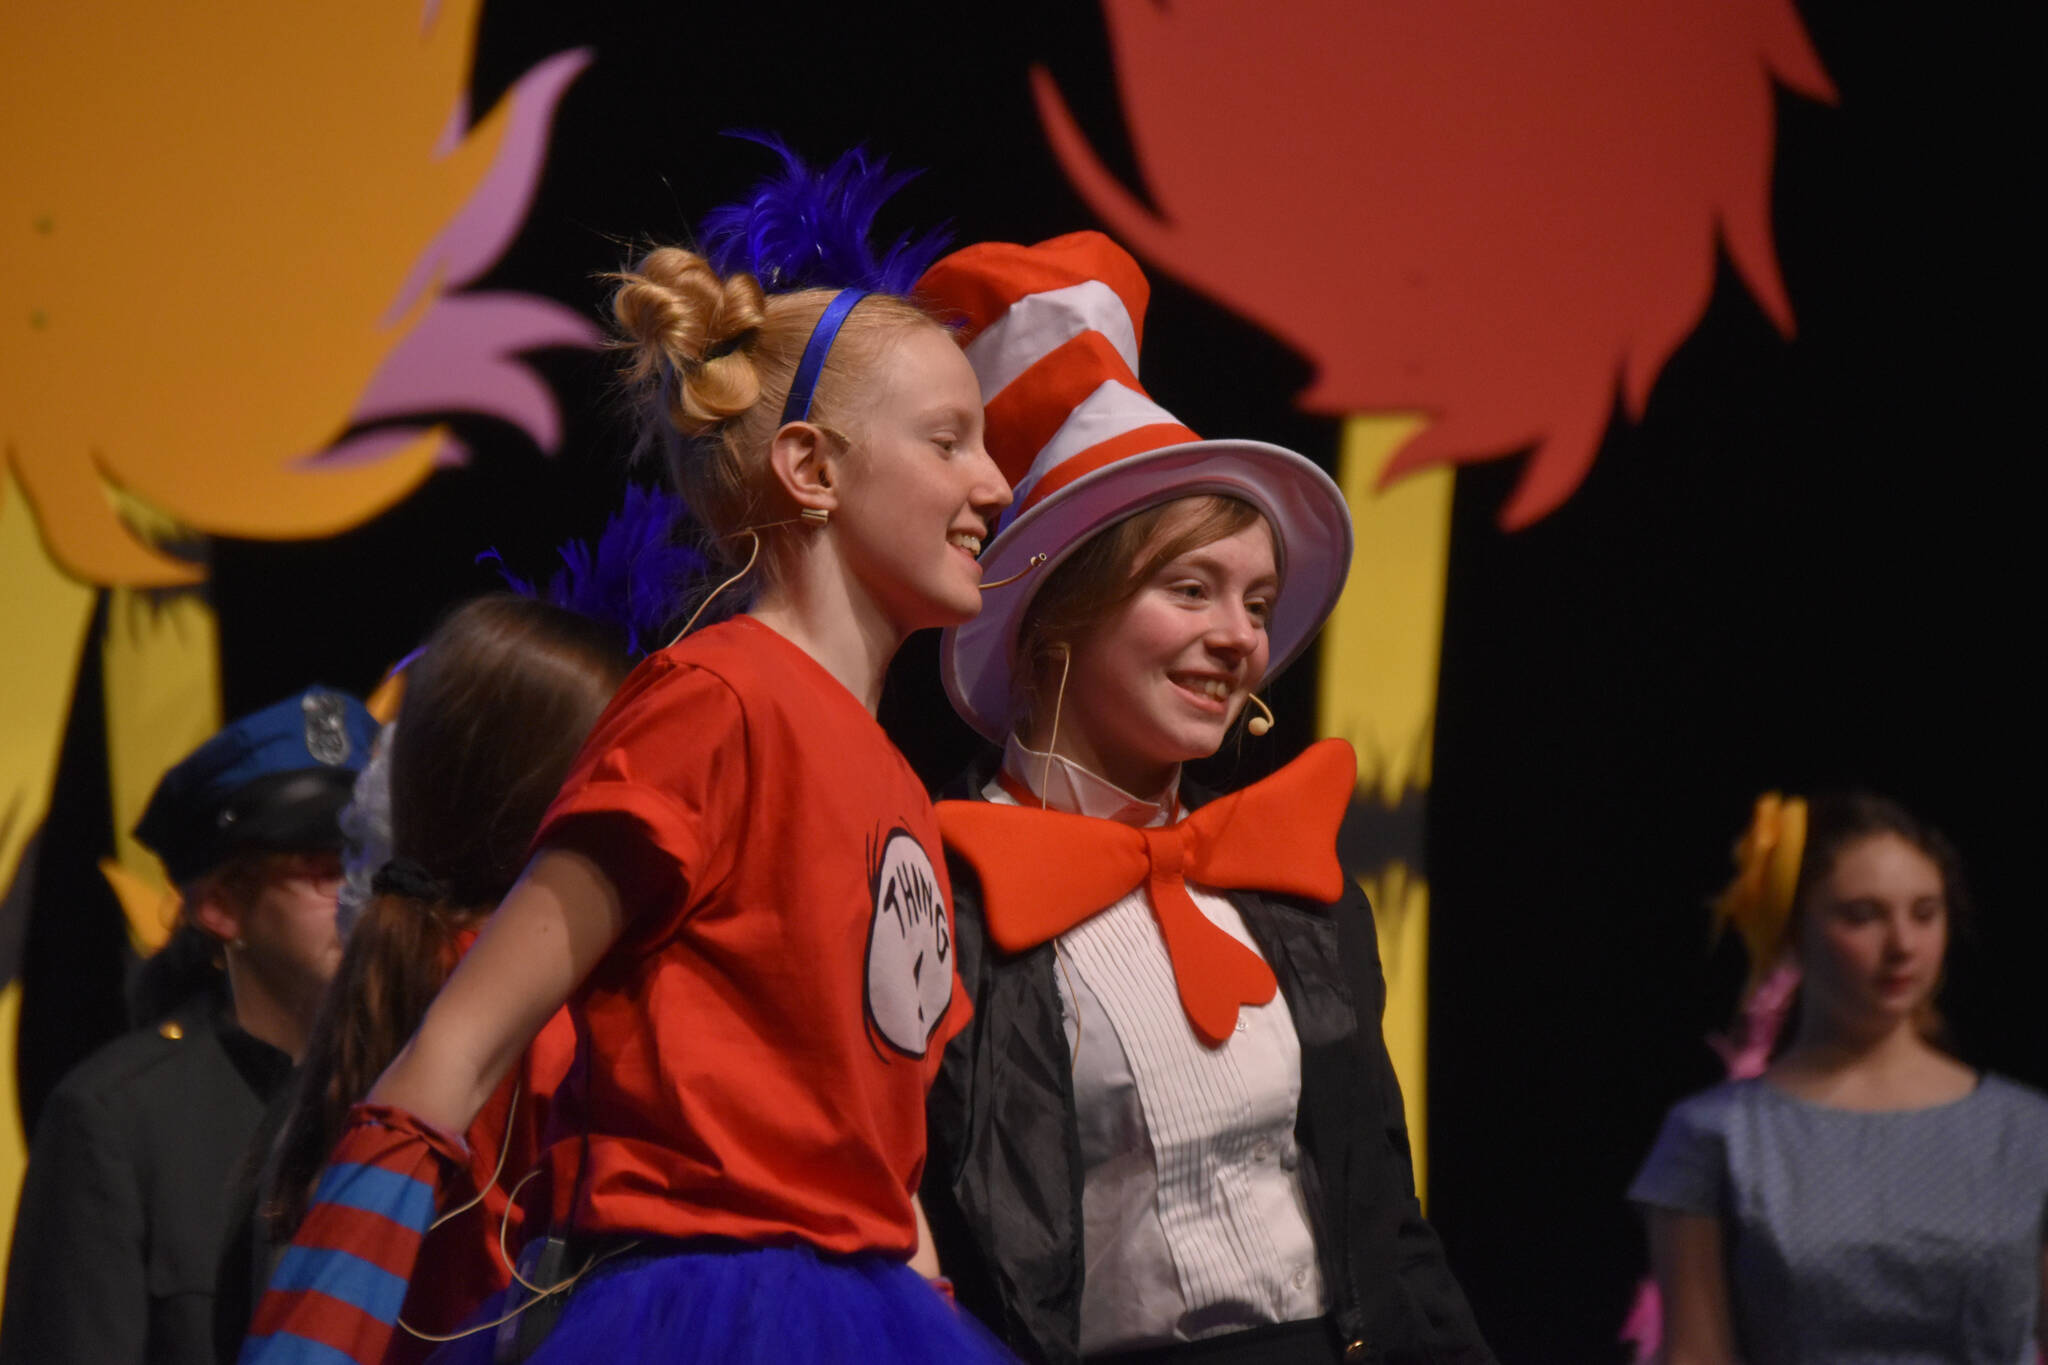 The cast of Triumvirate Theatre’s production of “Seussical,” portraying Thing 1 and The Cat in the Hat rehearse on Wednesday, Feb. 8, 2023, in the Renee C. Henderson Auditorium at Kenai Central High School in Kenai, Alaska. (Jake Dye/Peninsula Clarion)